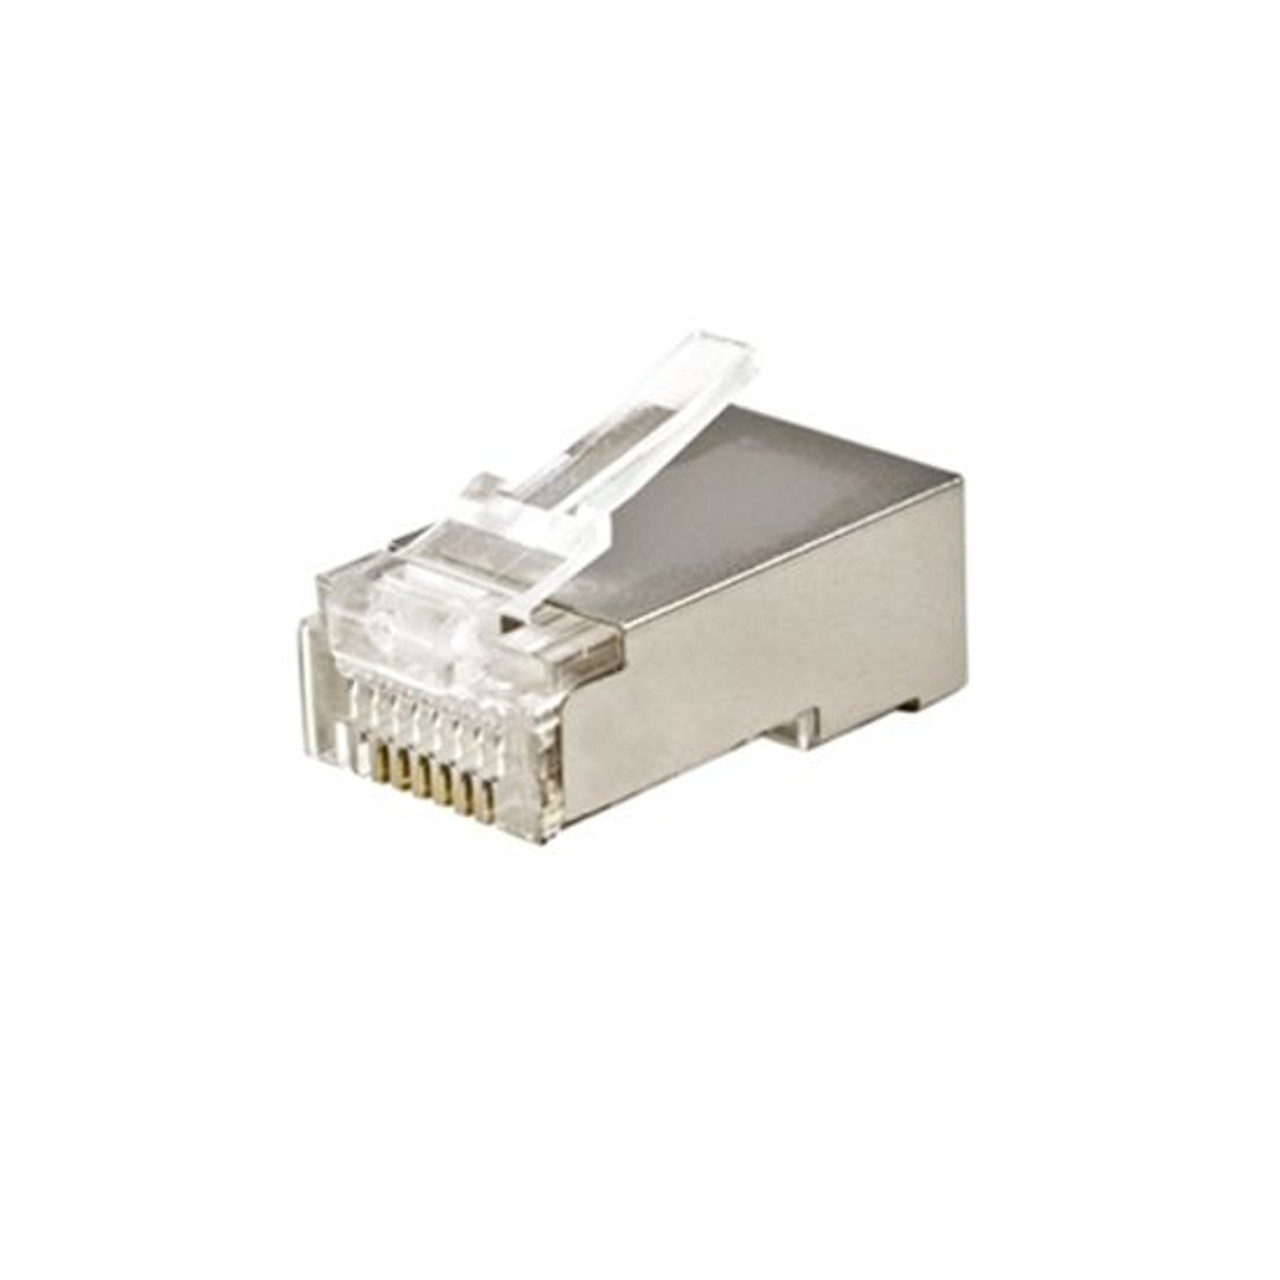 Eagle CAT6 RJ45 Shielded Connector Terminates 22-24 AWG Stranded or Solid Cable High Impact Clear Polycarbonate Plugs